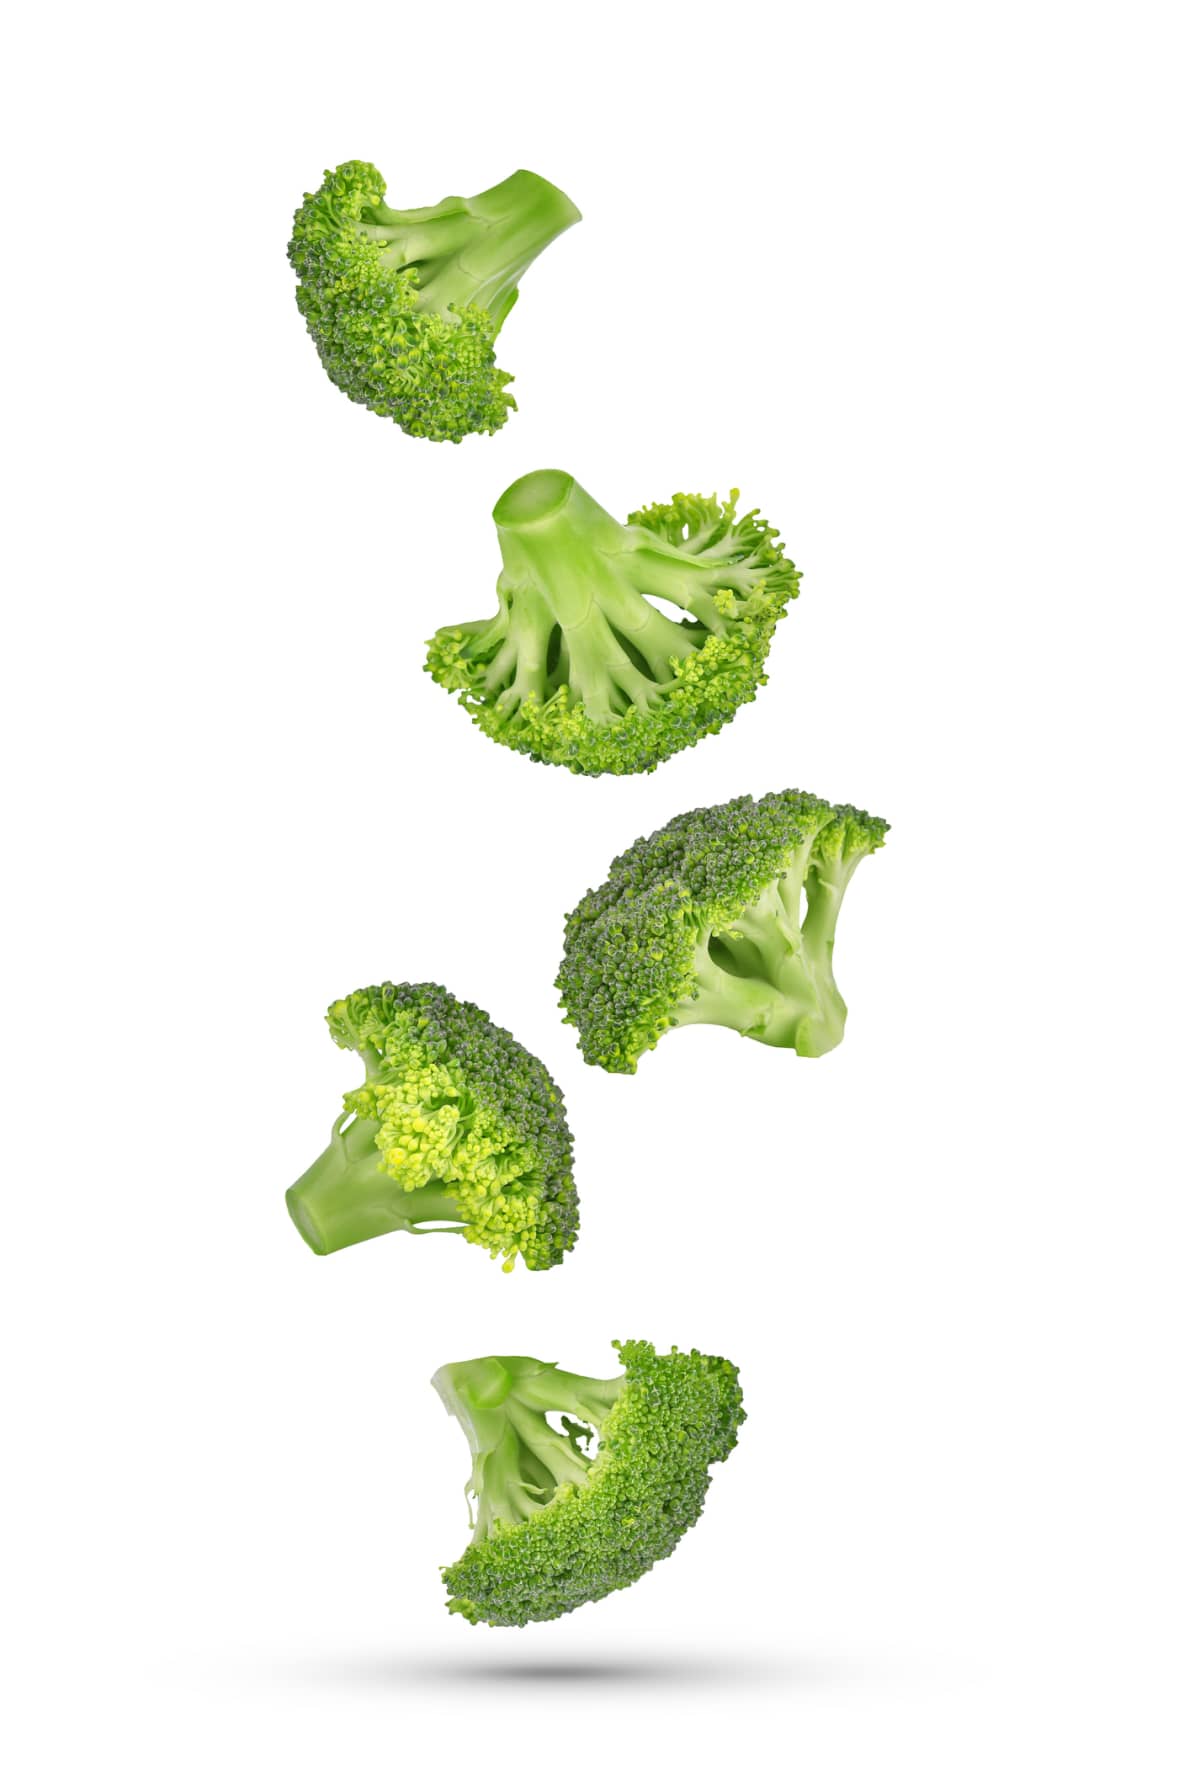 Pieces of broccoli falling in the air isolated on white background